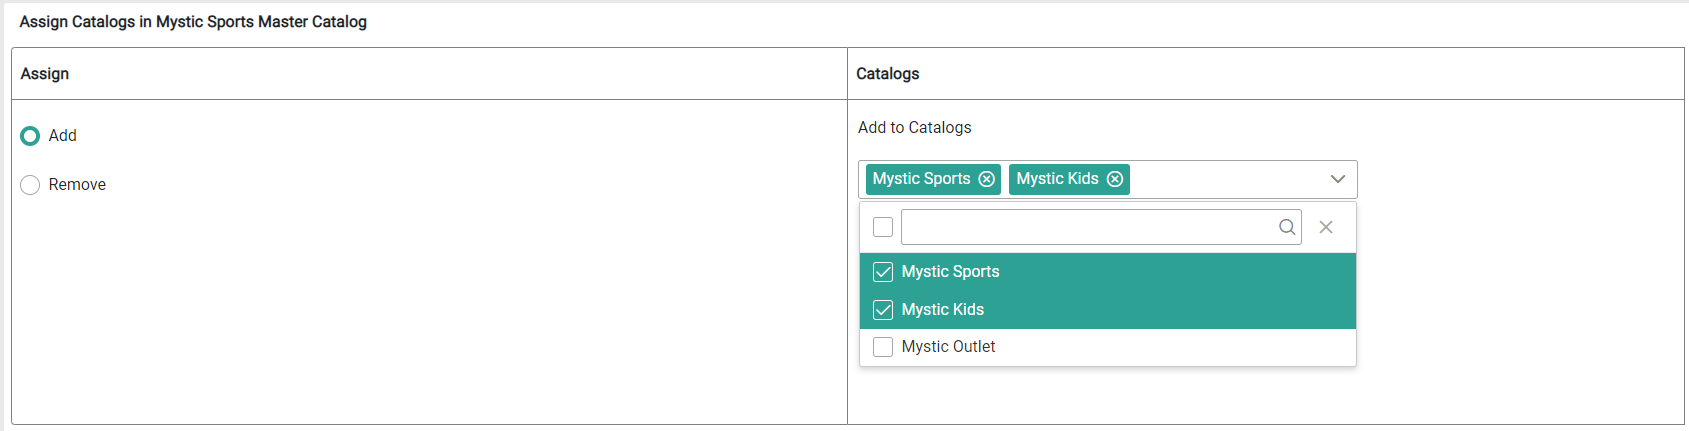 The Assign Catalogs step with Add selected and several catalogs checked in the drop-down menu